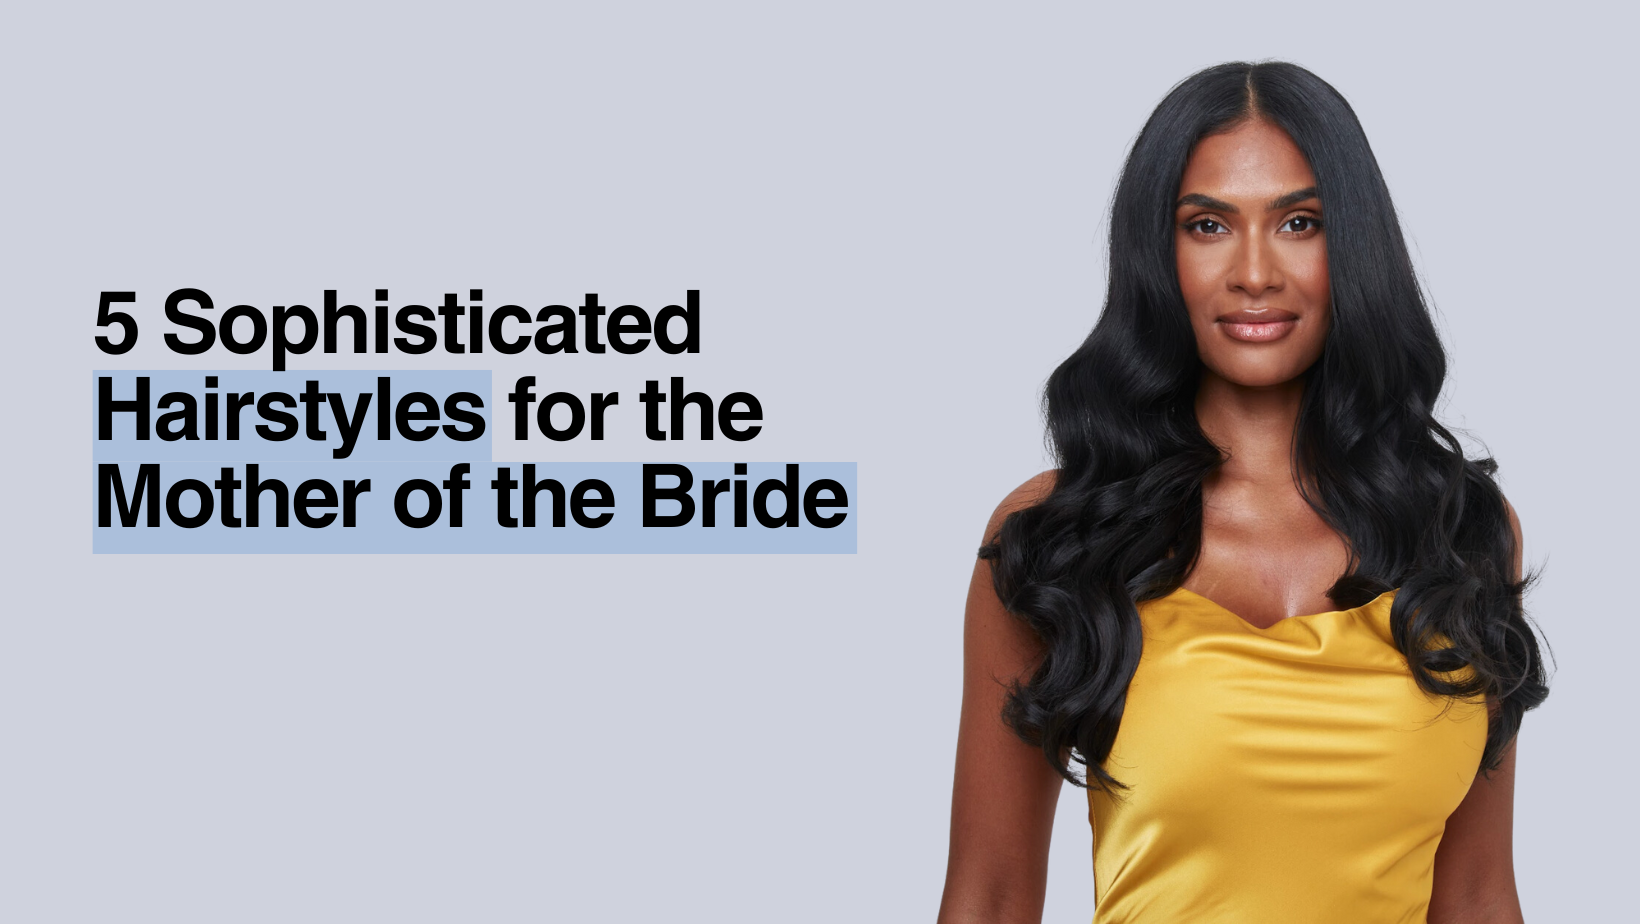 5 Sophisticated Hairstyles for the Mother of the Bride